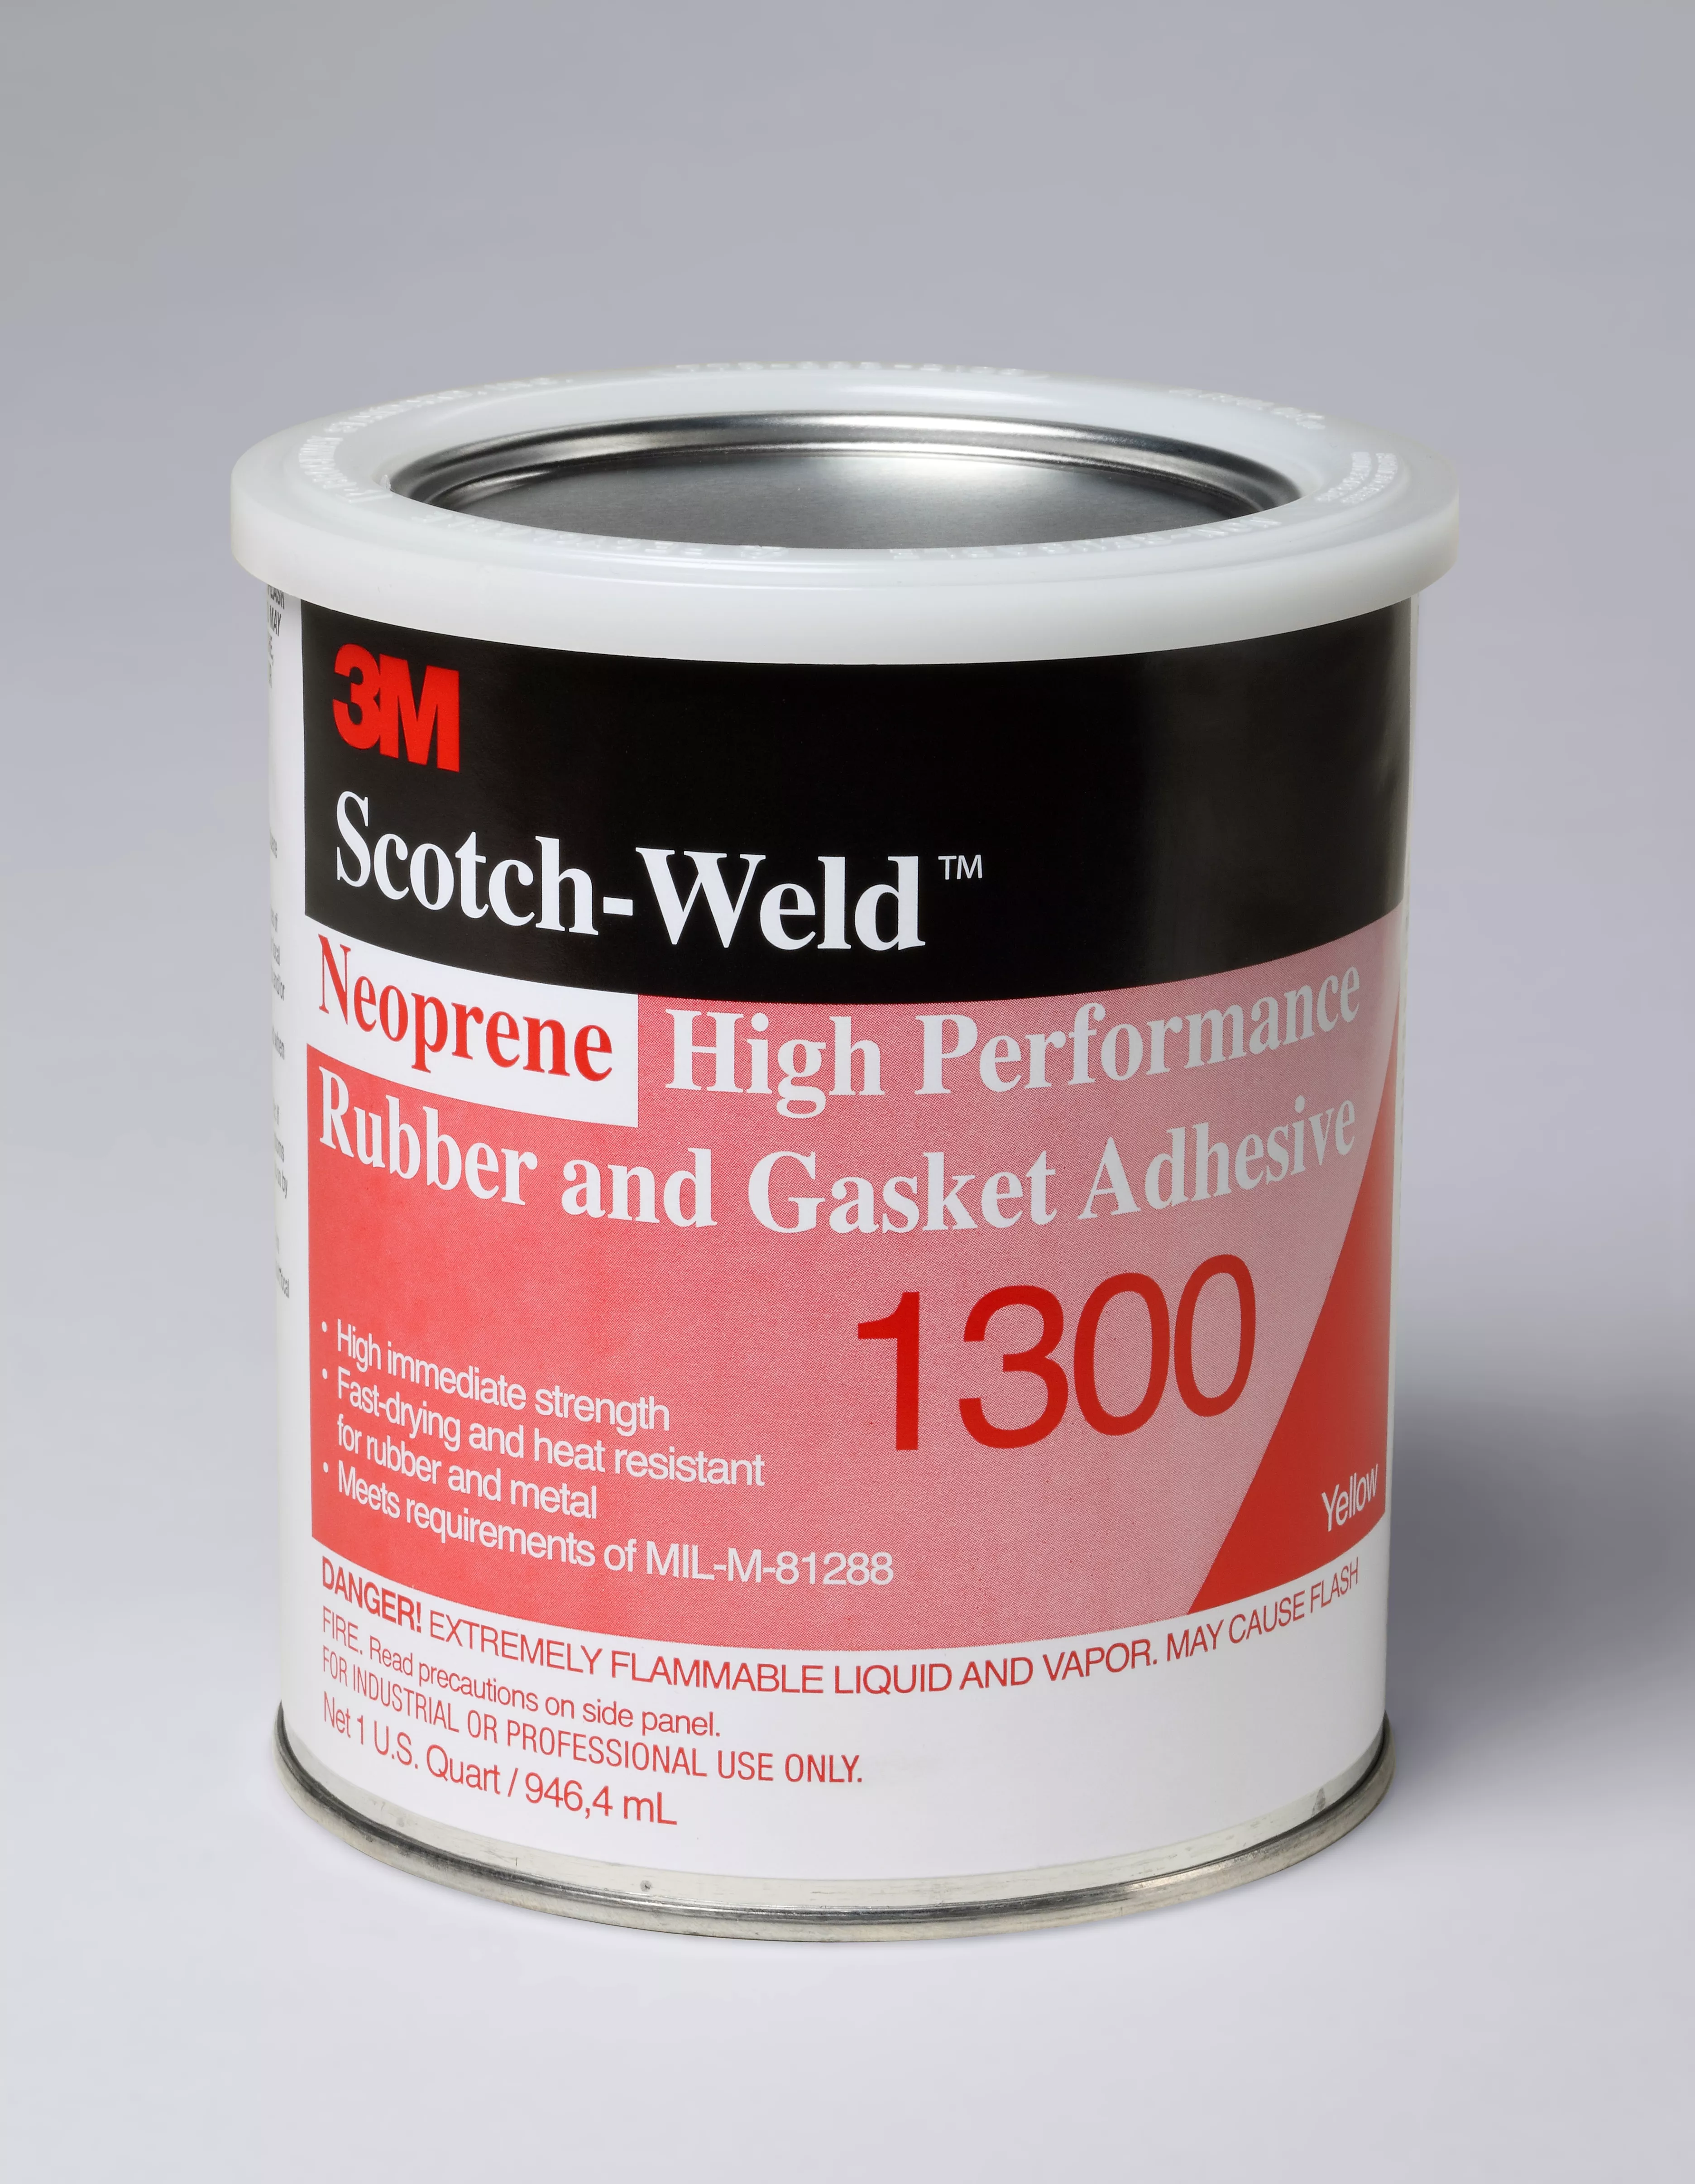 3M™ Neoprene High Performance Rubber and Gasket Adhesive 1300, Yellow, 1
Quart, 12 Can/Case